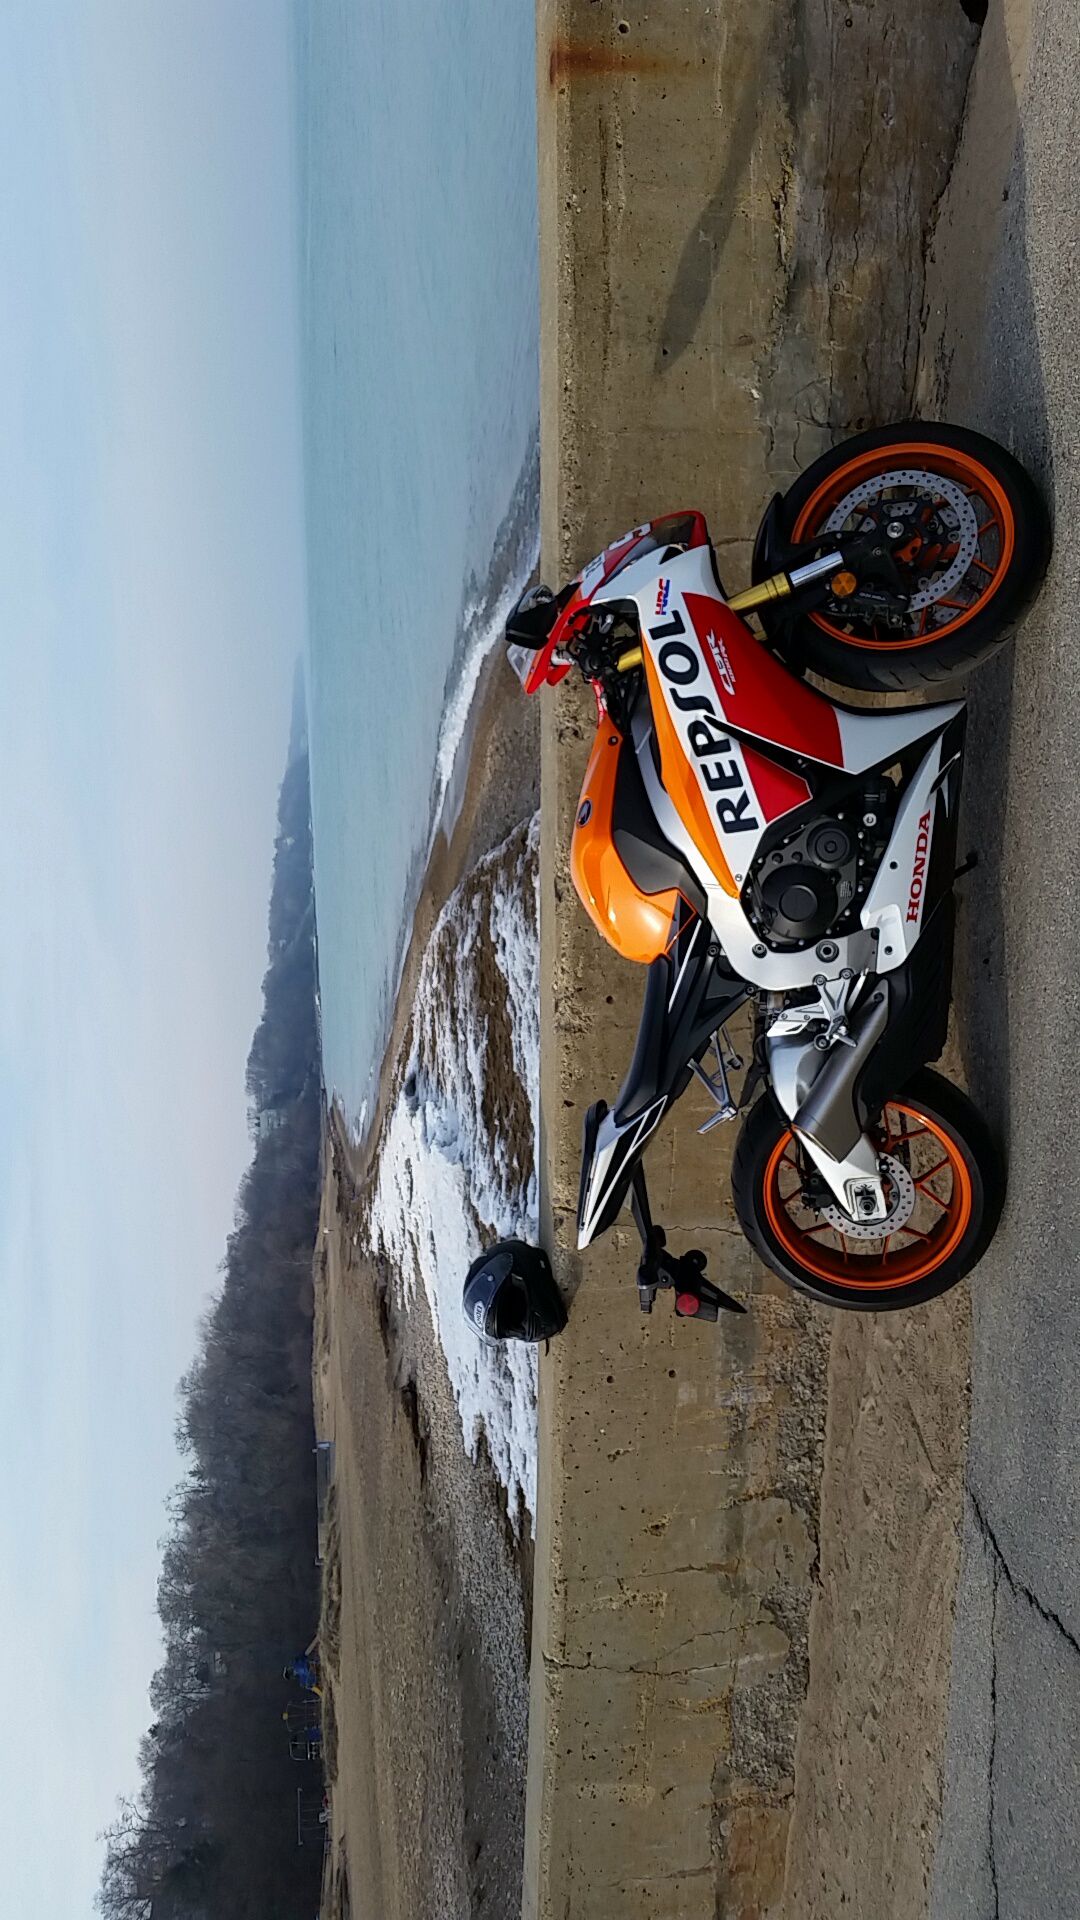 Cold ride to the beach